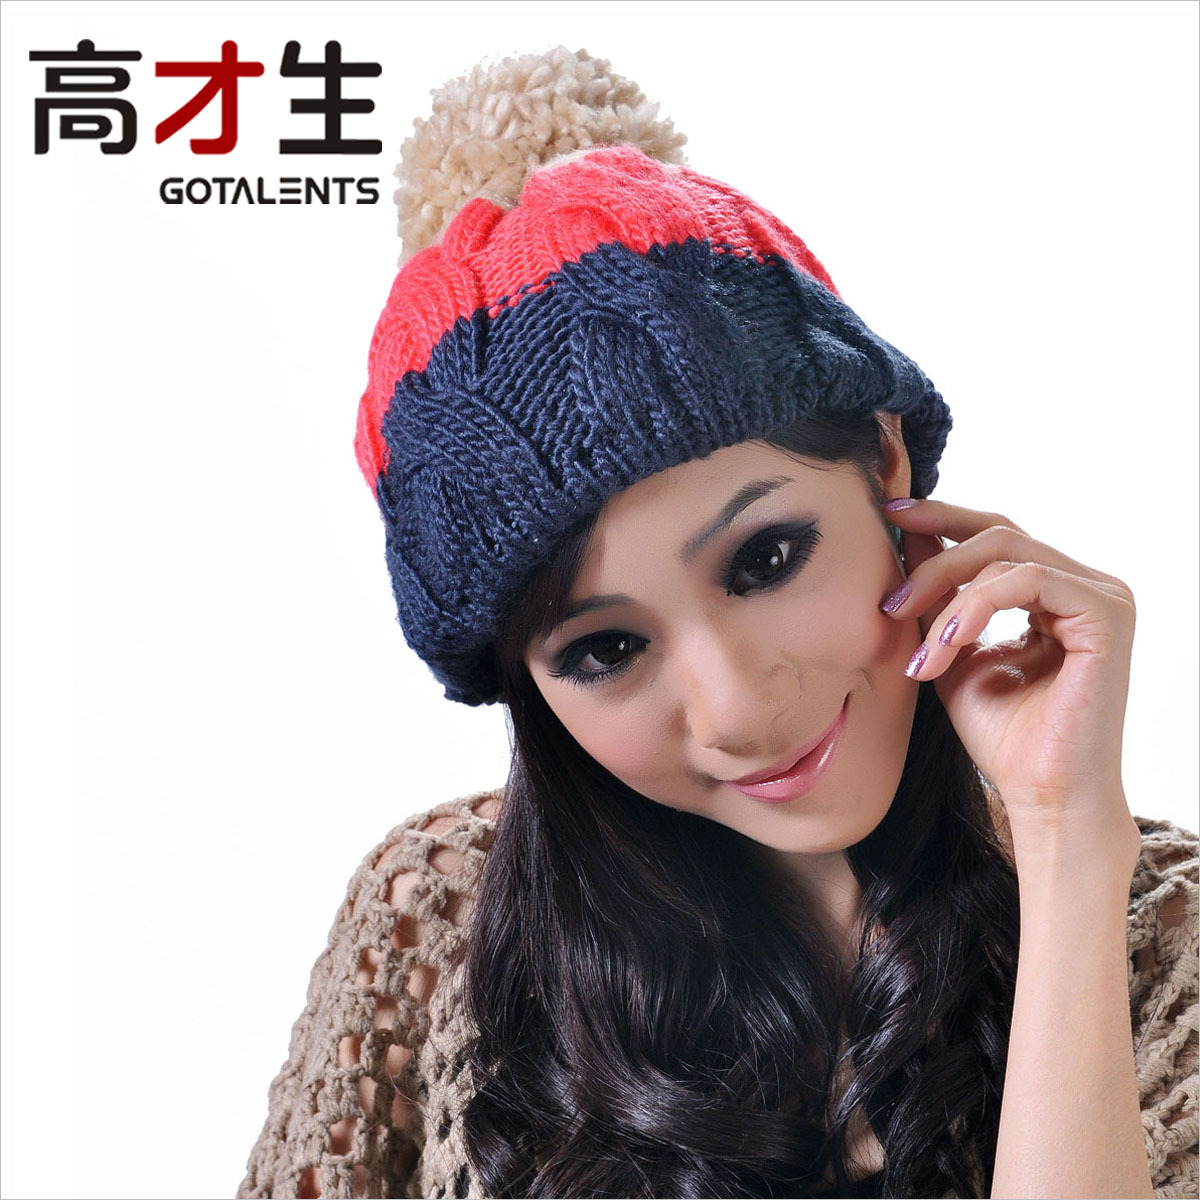 Knitted hat pocket hat autumn and winter women's hat multicolour big hair balls knitted hat